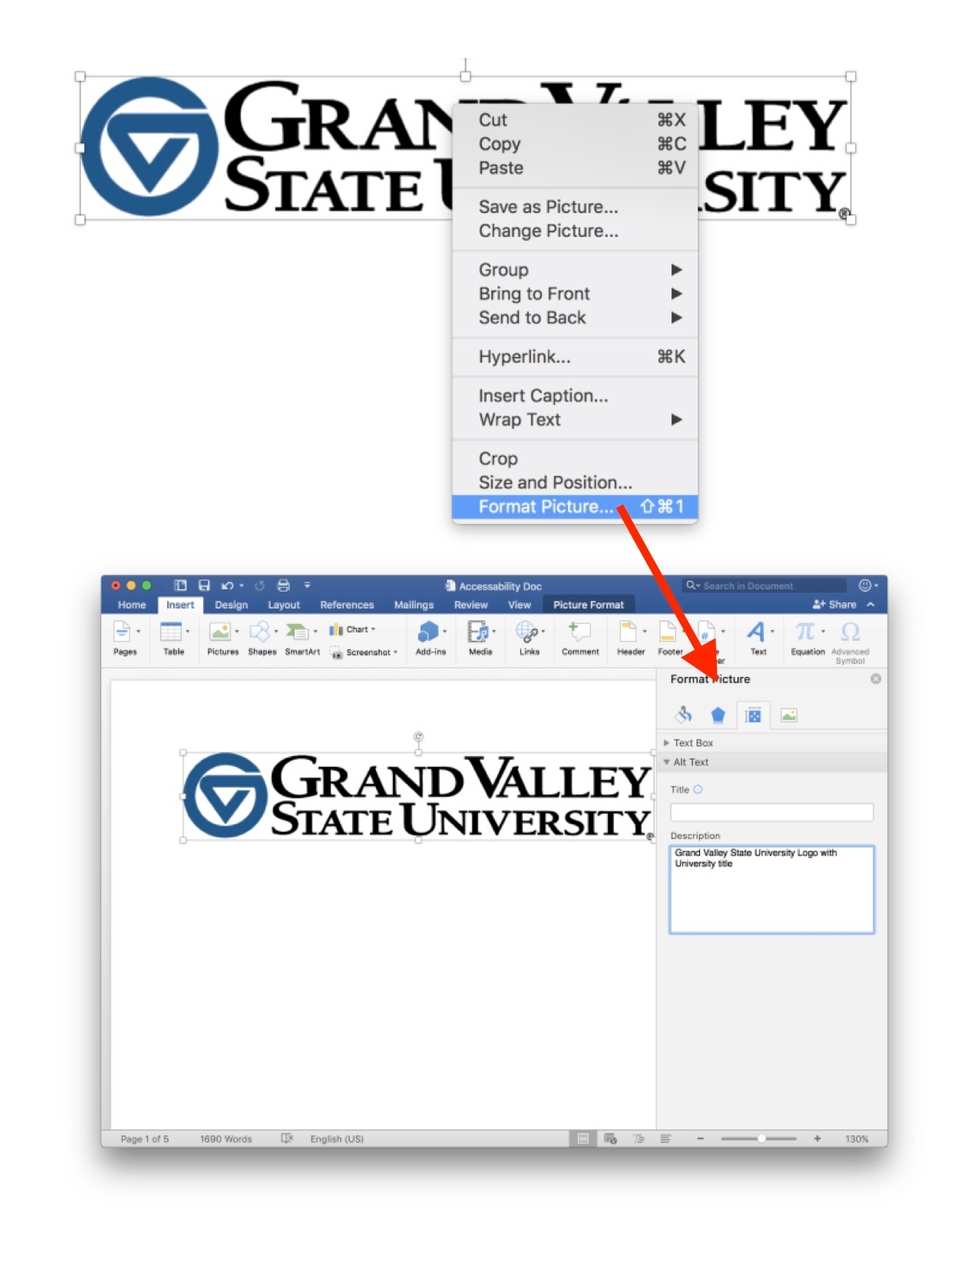 Top Half: Grand Valley State University Logo in a word document, right-clicked, Format Picture highlighted. Bottom Half: Format Picture Window Open with Layout and Properties Tab selected, text stating "Grand Valley State University Logo with University title" in Description box